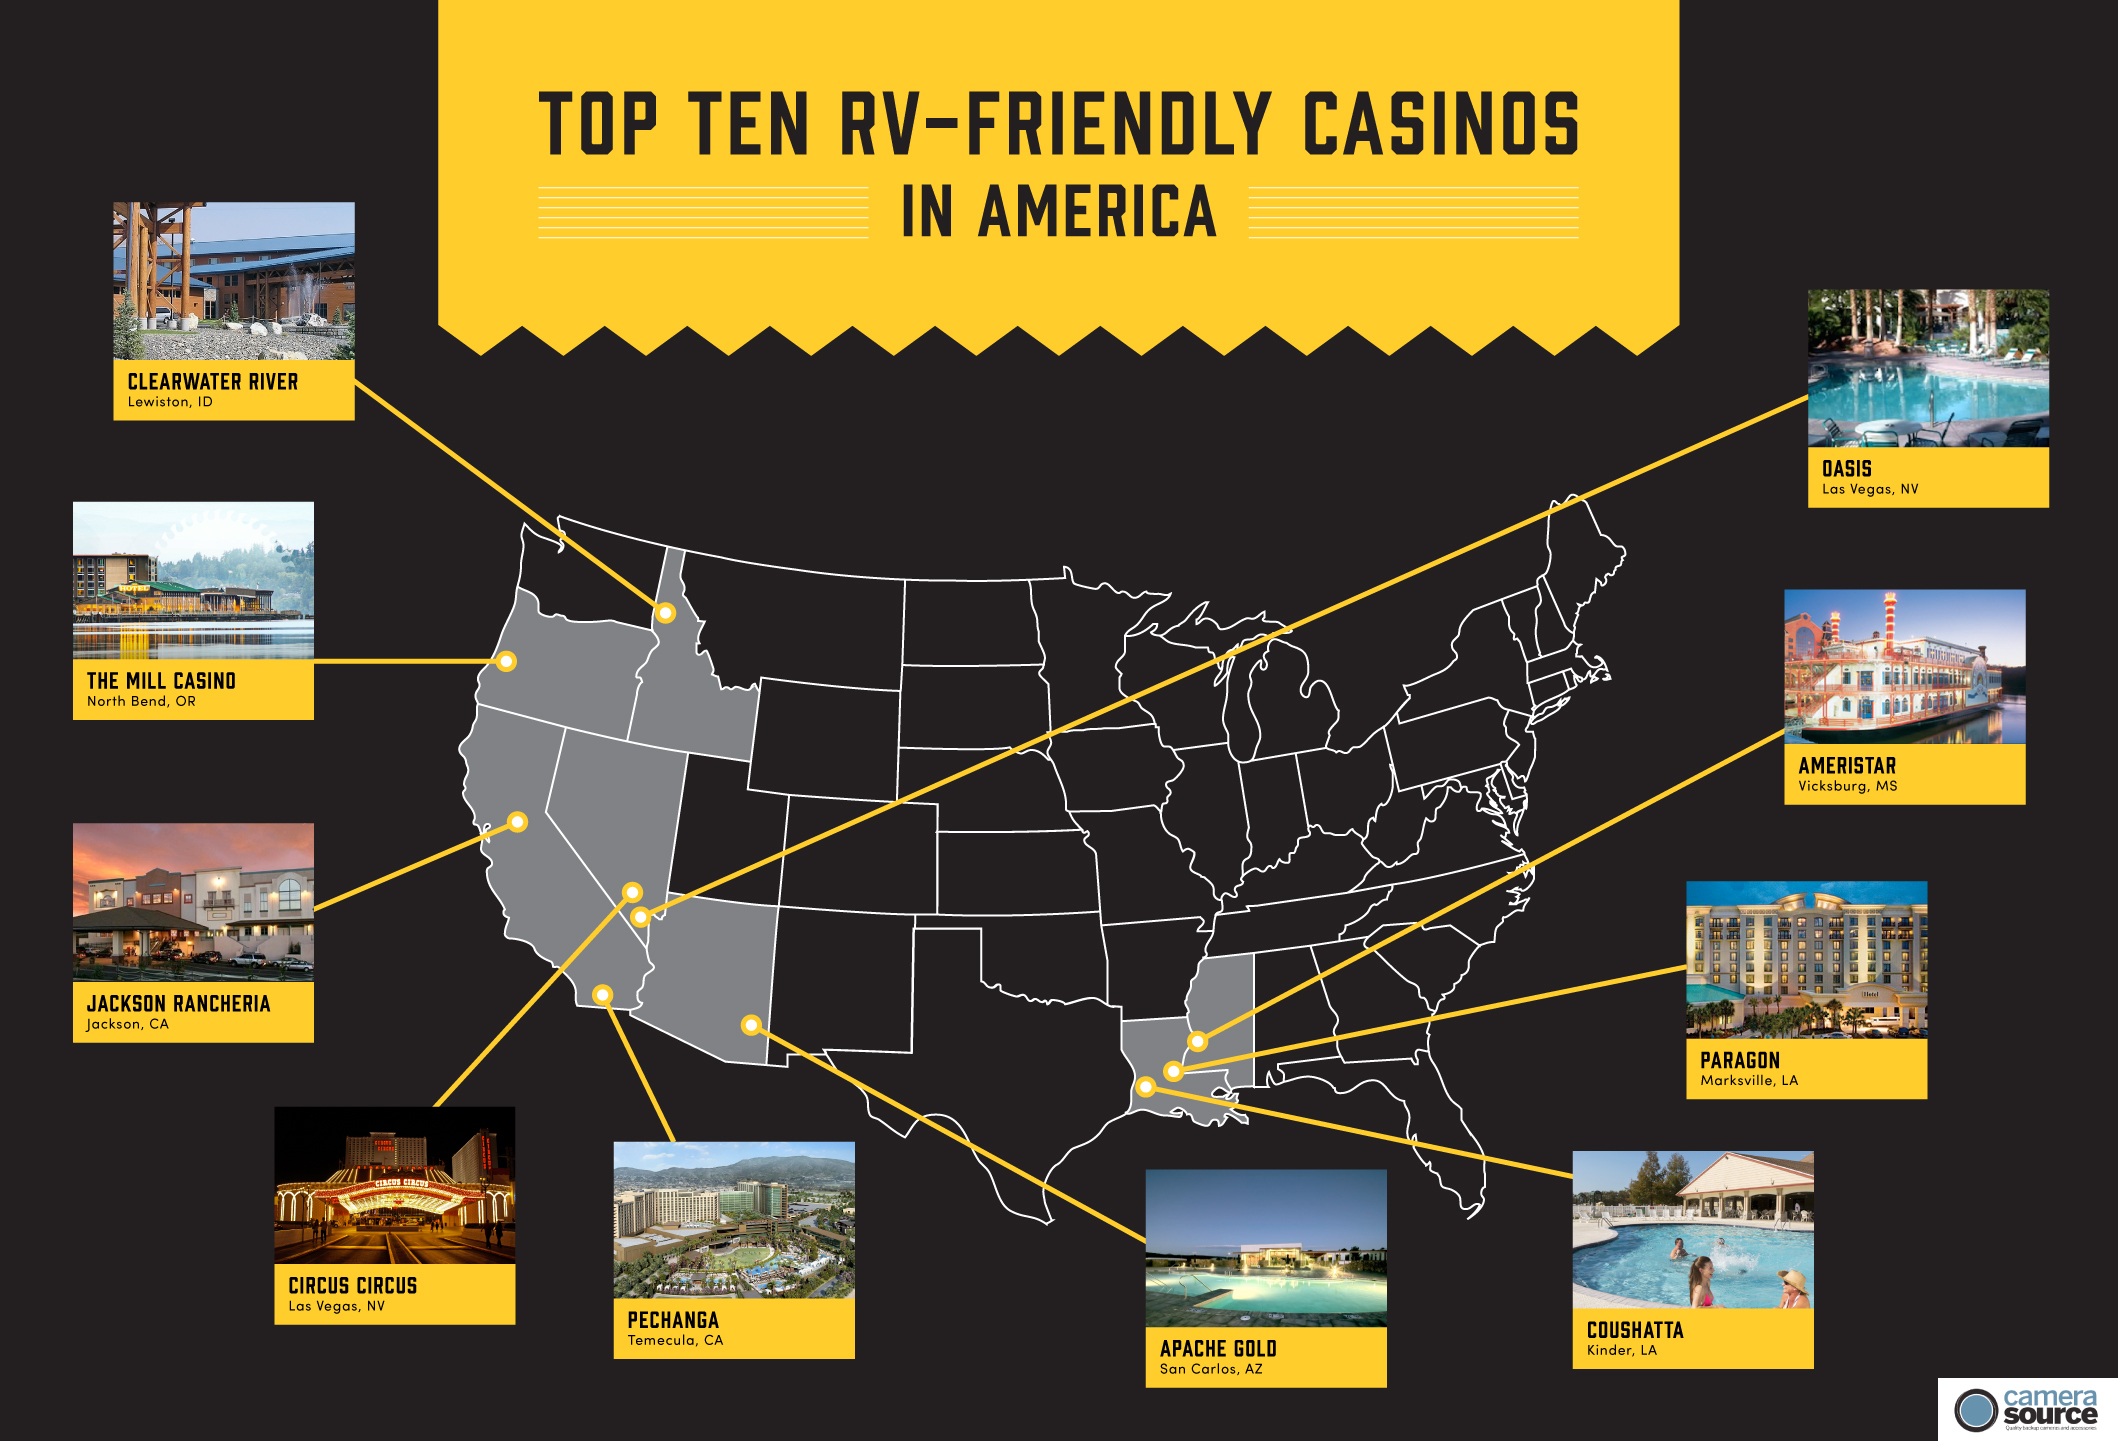 Today, we’ve put together a list of the top ten RV-friendly casinos that make RV-gaming a pleasure